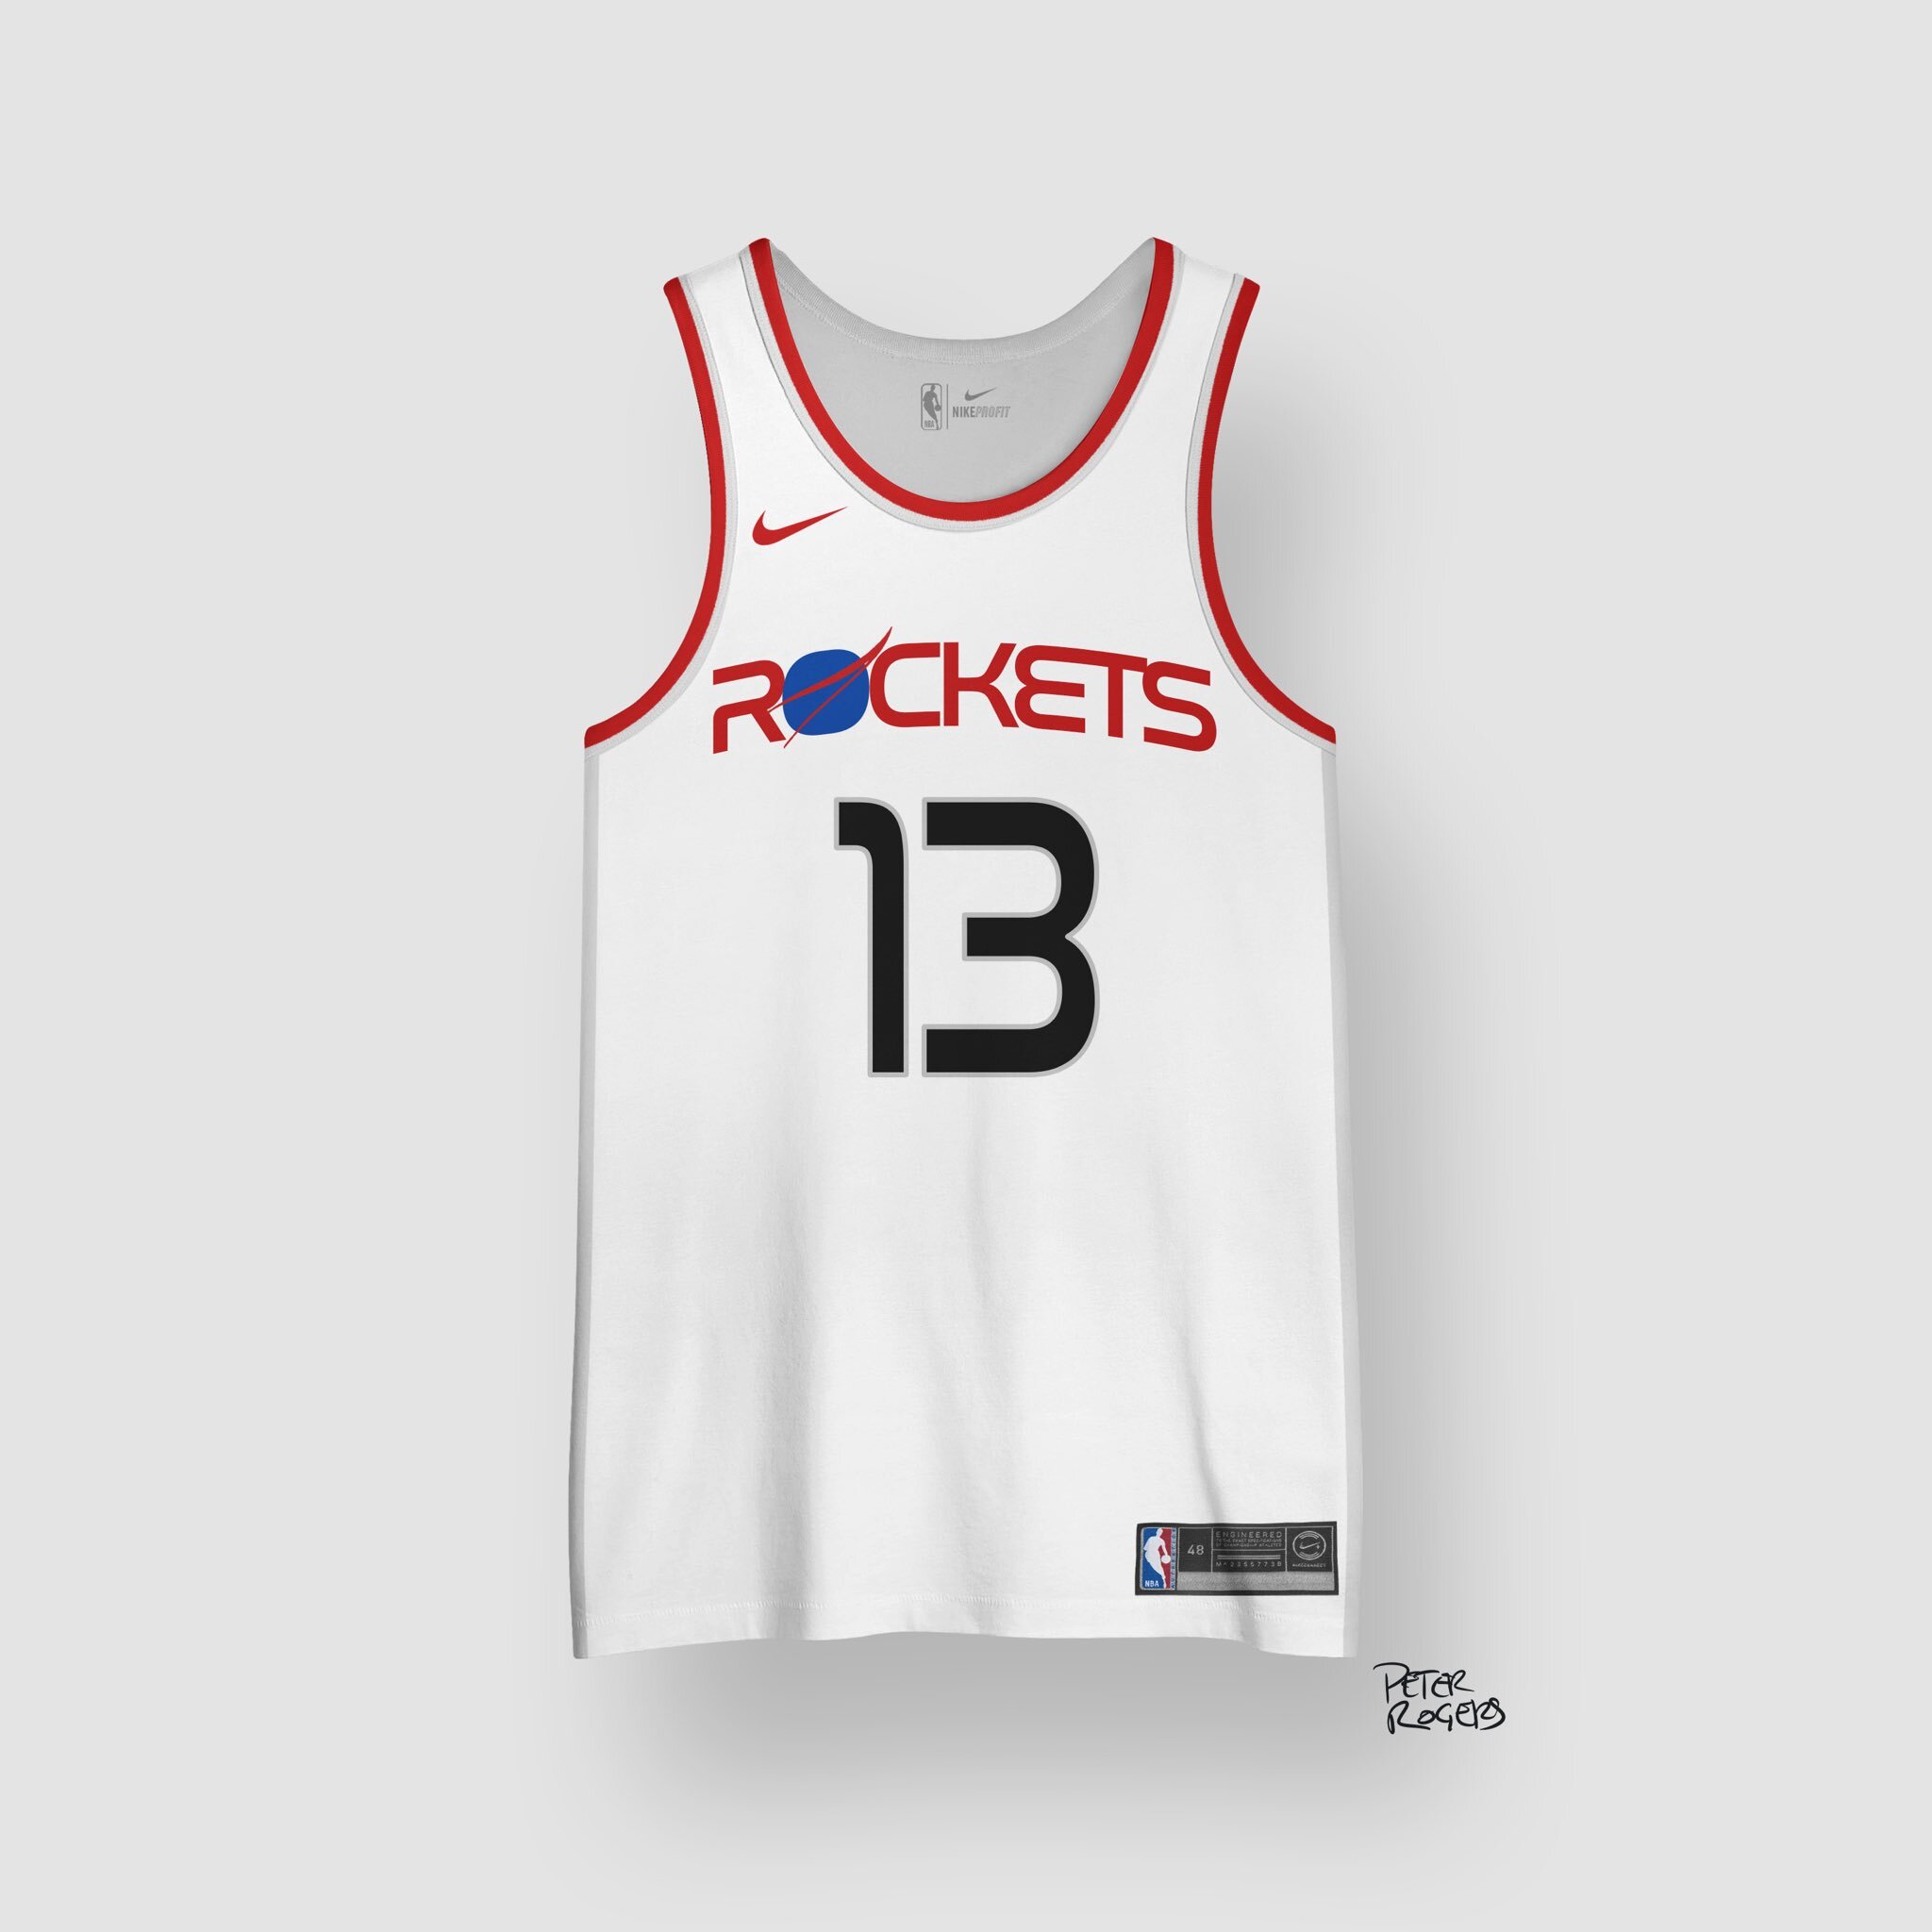 These redesigned NBA jerseys will blow your mind